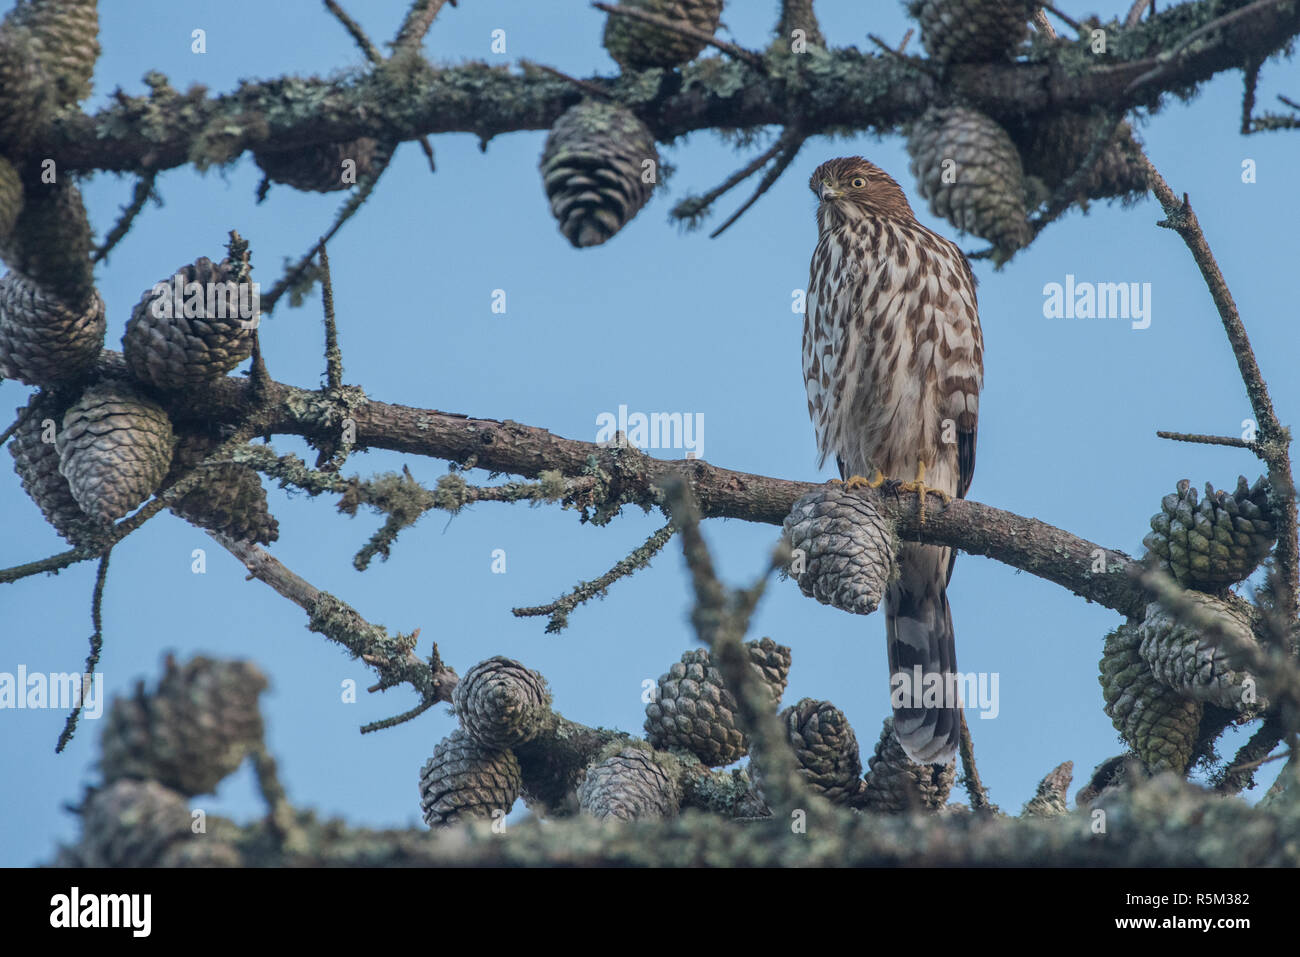 Cooper's hawk (Accipiter cooperii) perched in one of California's regional parks in the San Francisco Bay area. Stock Photo